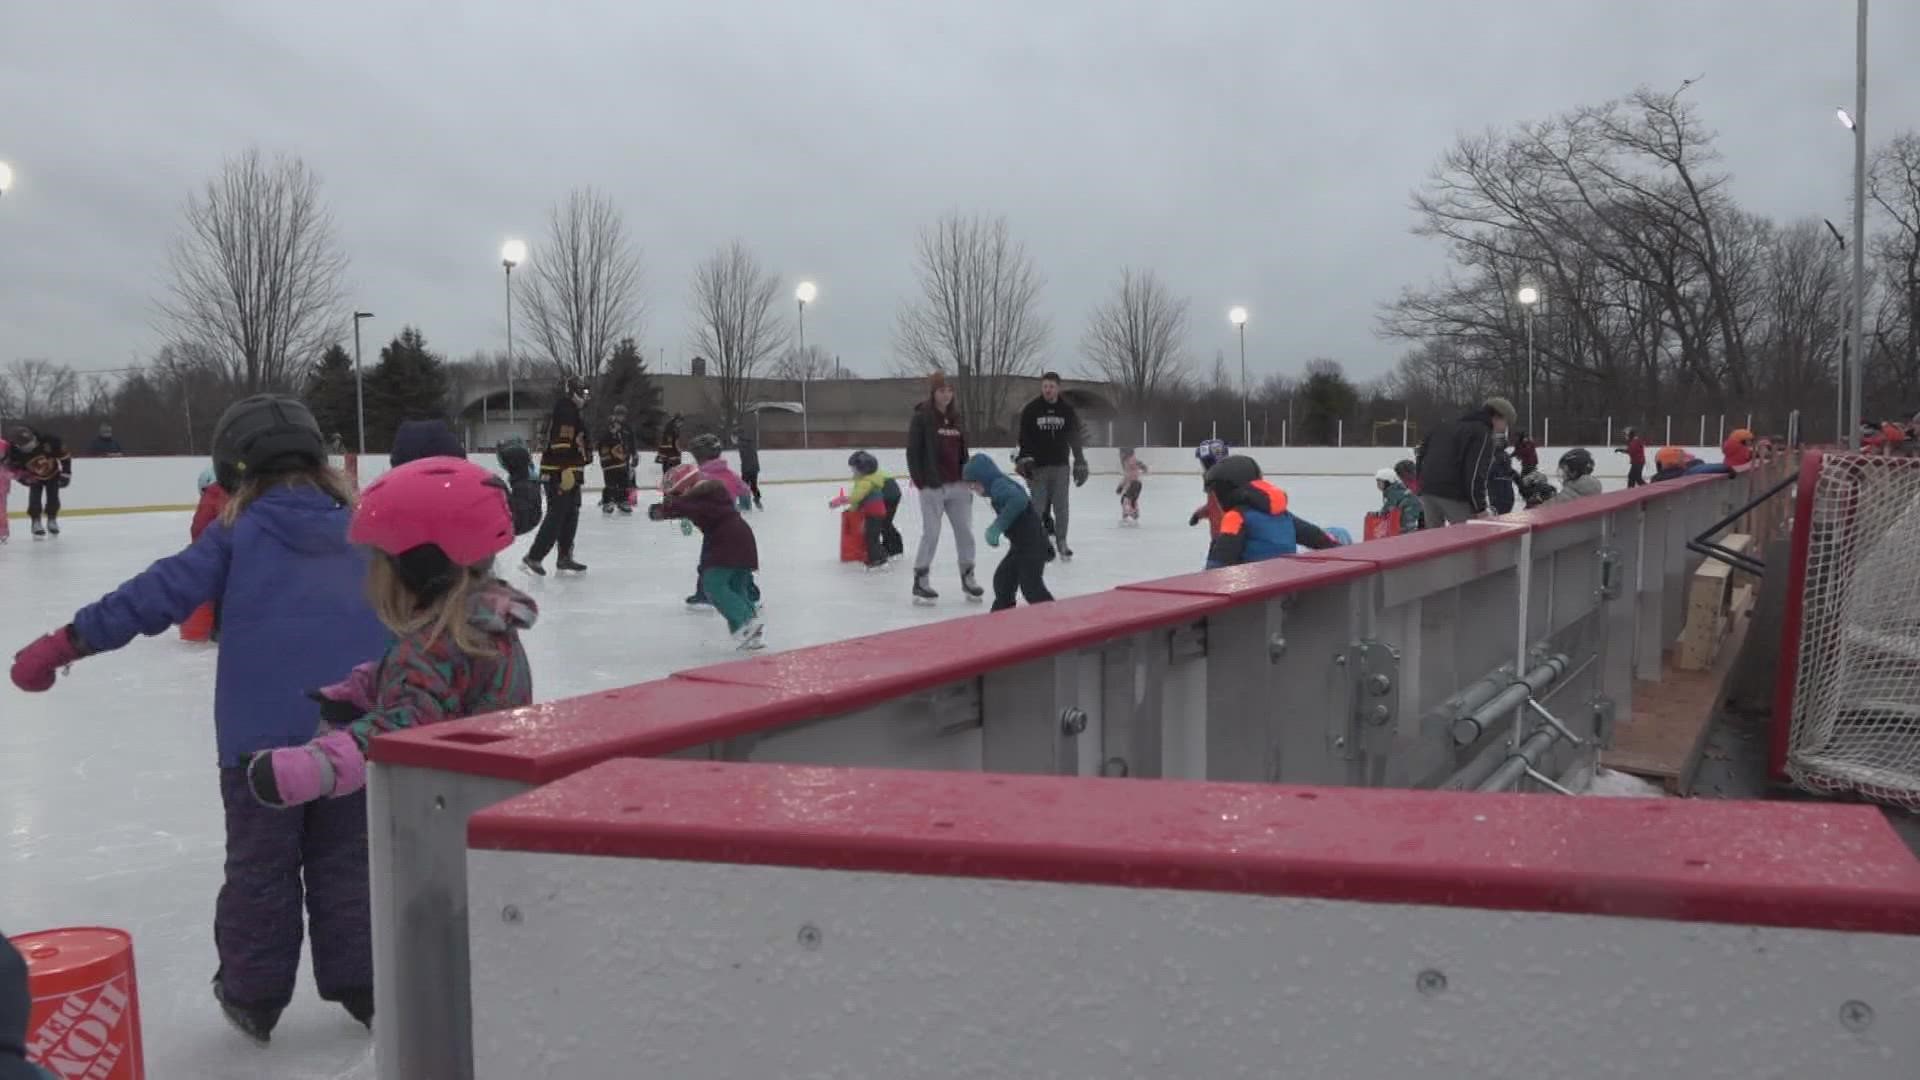 On Jan. 6, the Cape Community Arena Group opened its fully-funded ice rink to the public and it's already a big hit.